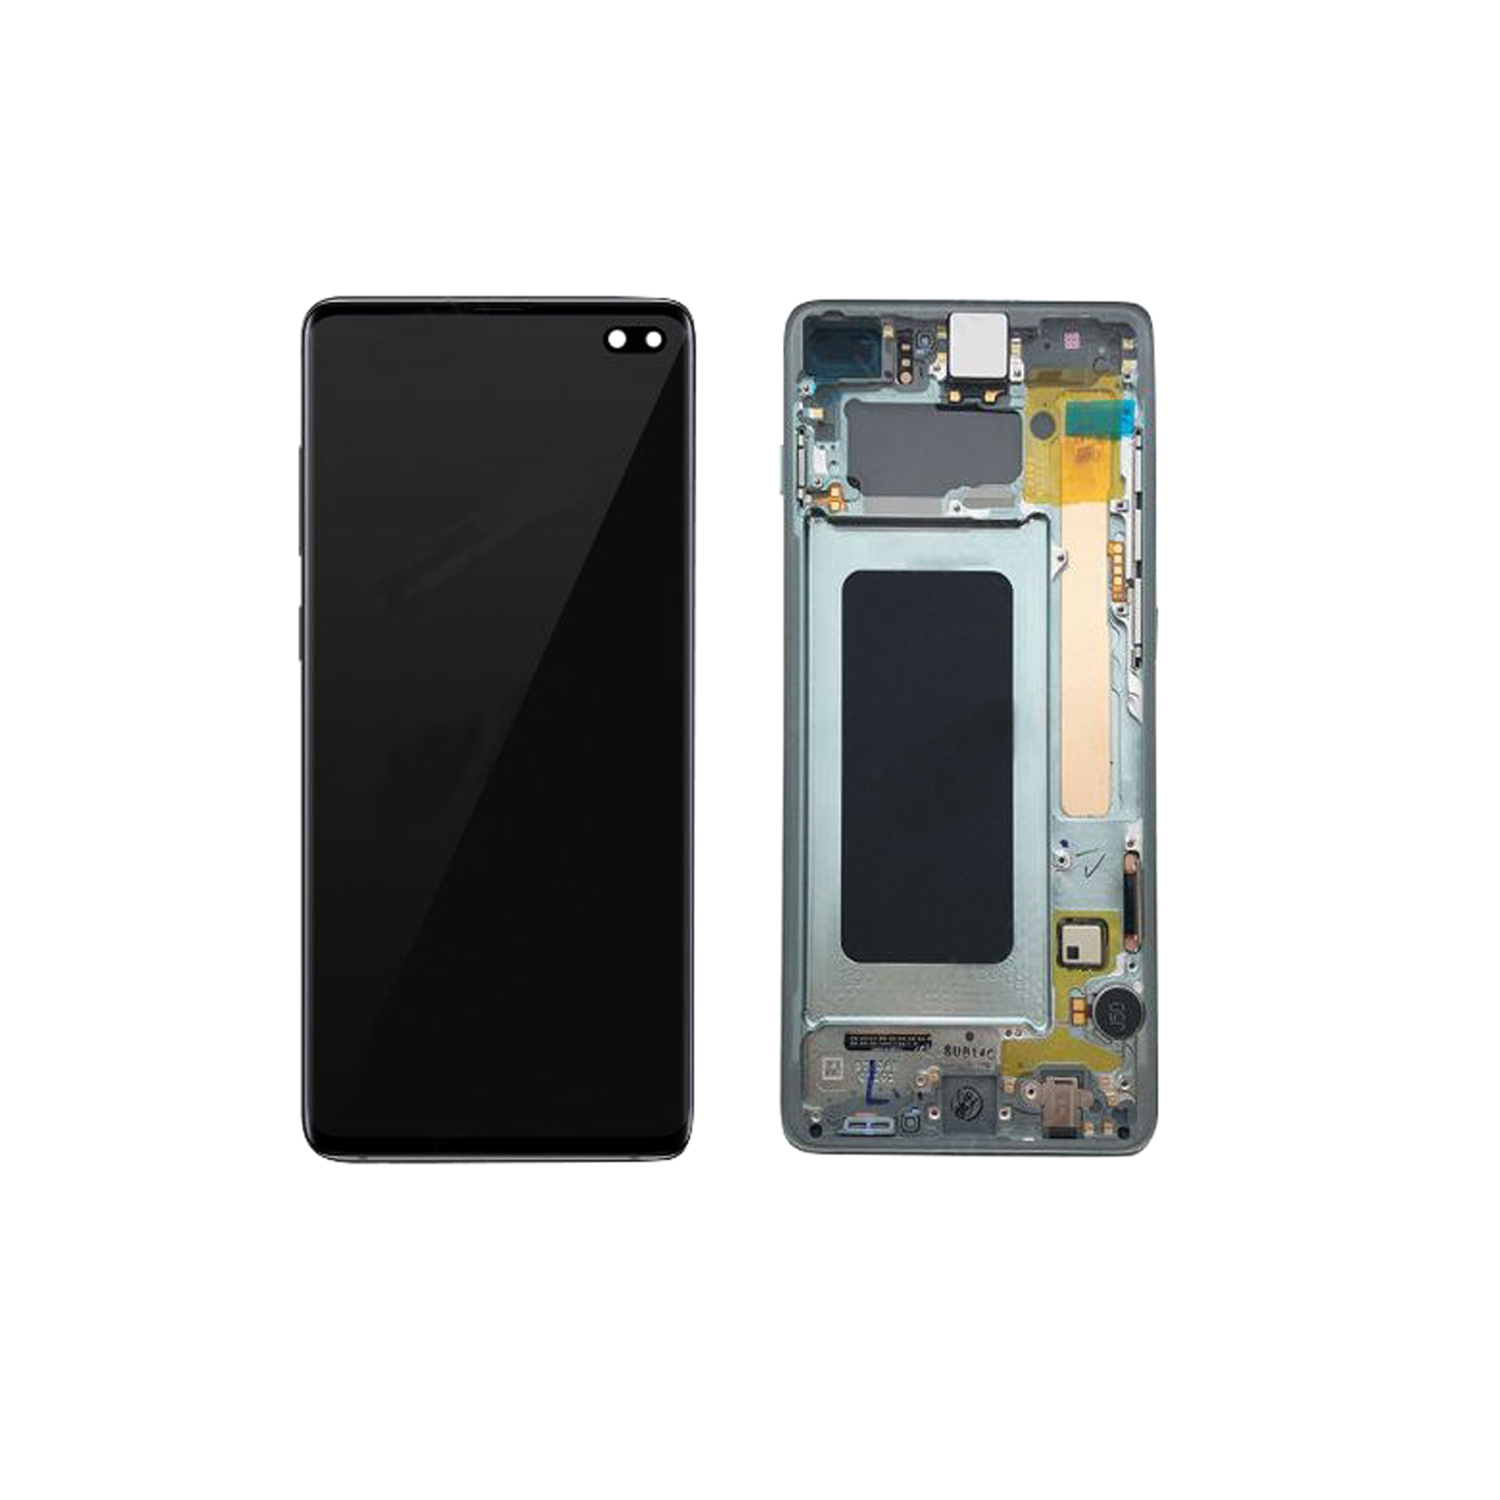 Replacement LCD Display Touch Screen Digitizer Assembly With Frame For Samsung Galaxy S10 Plus SM-G975W - Green